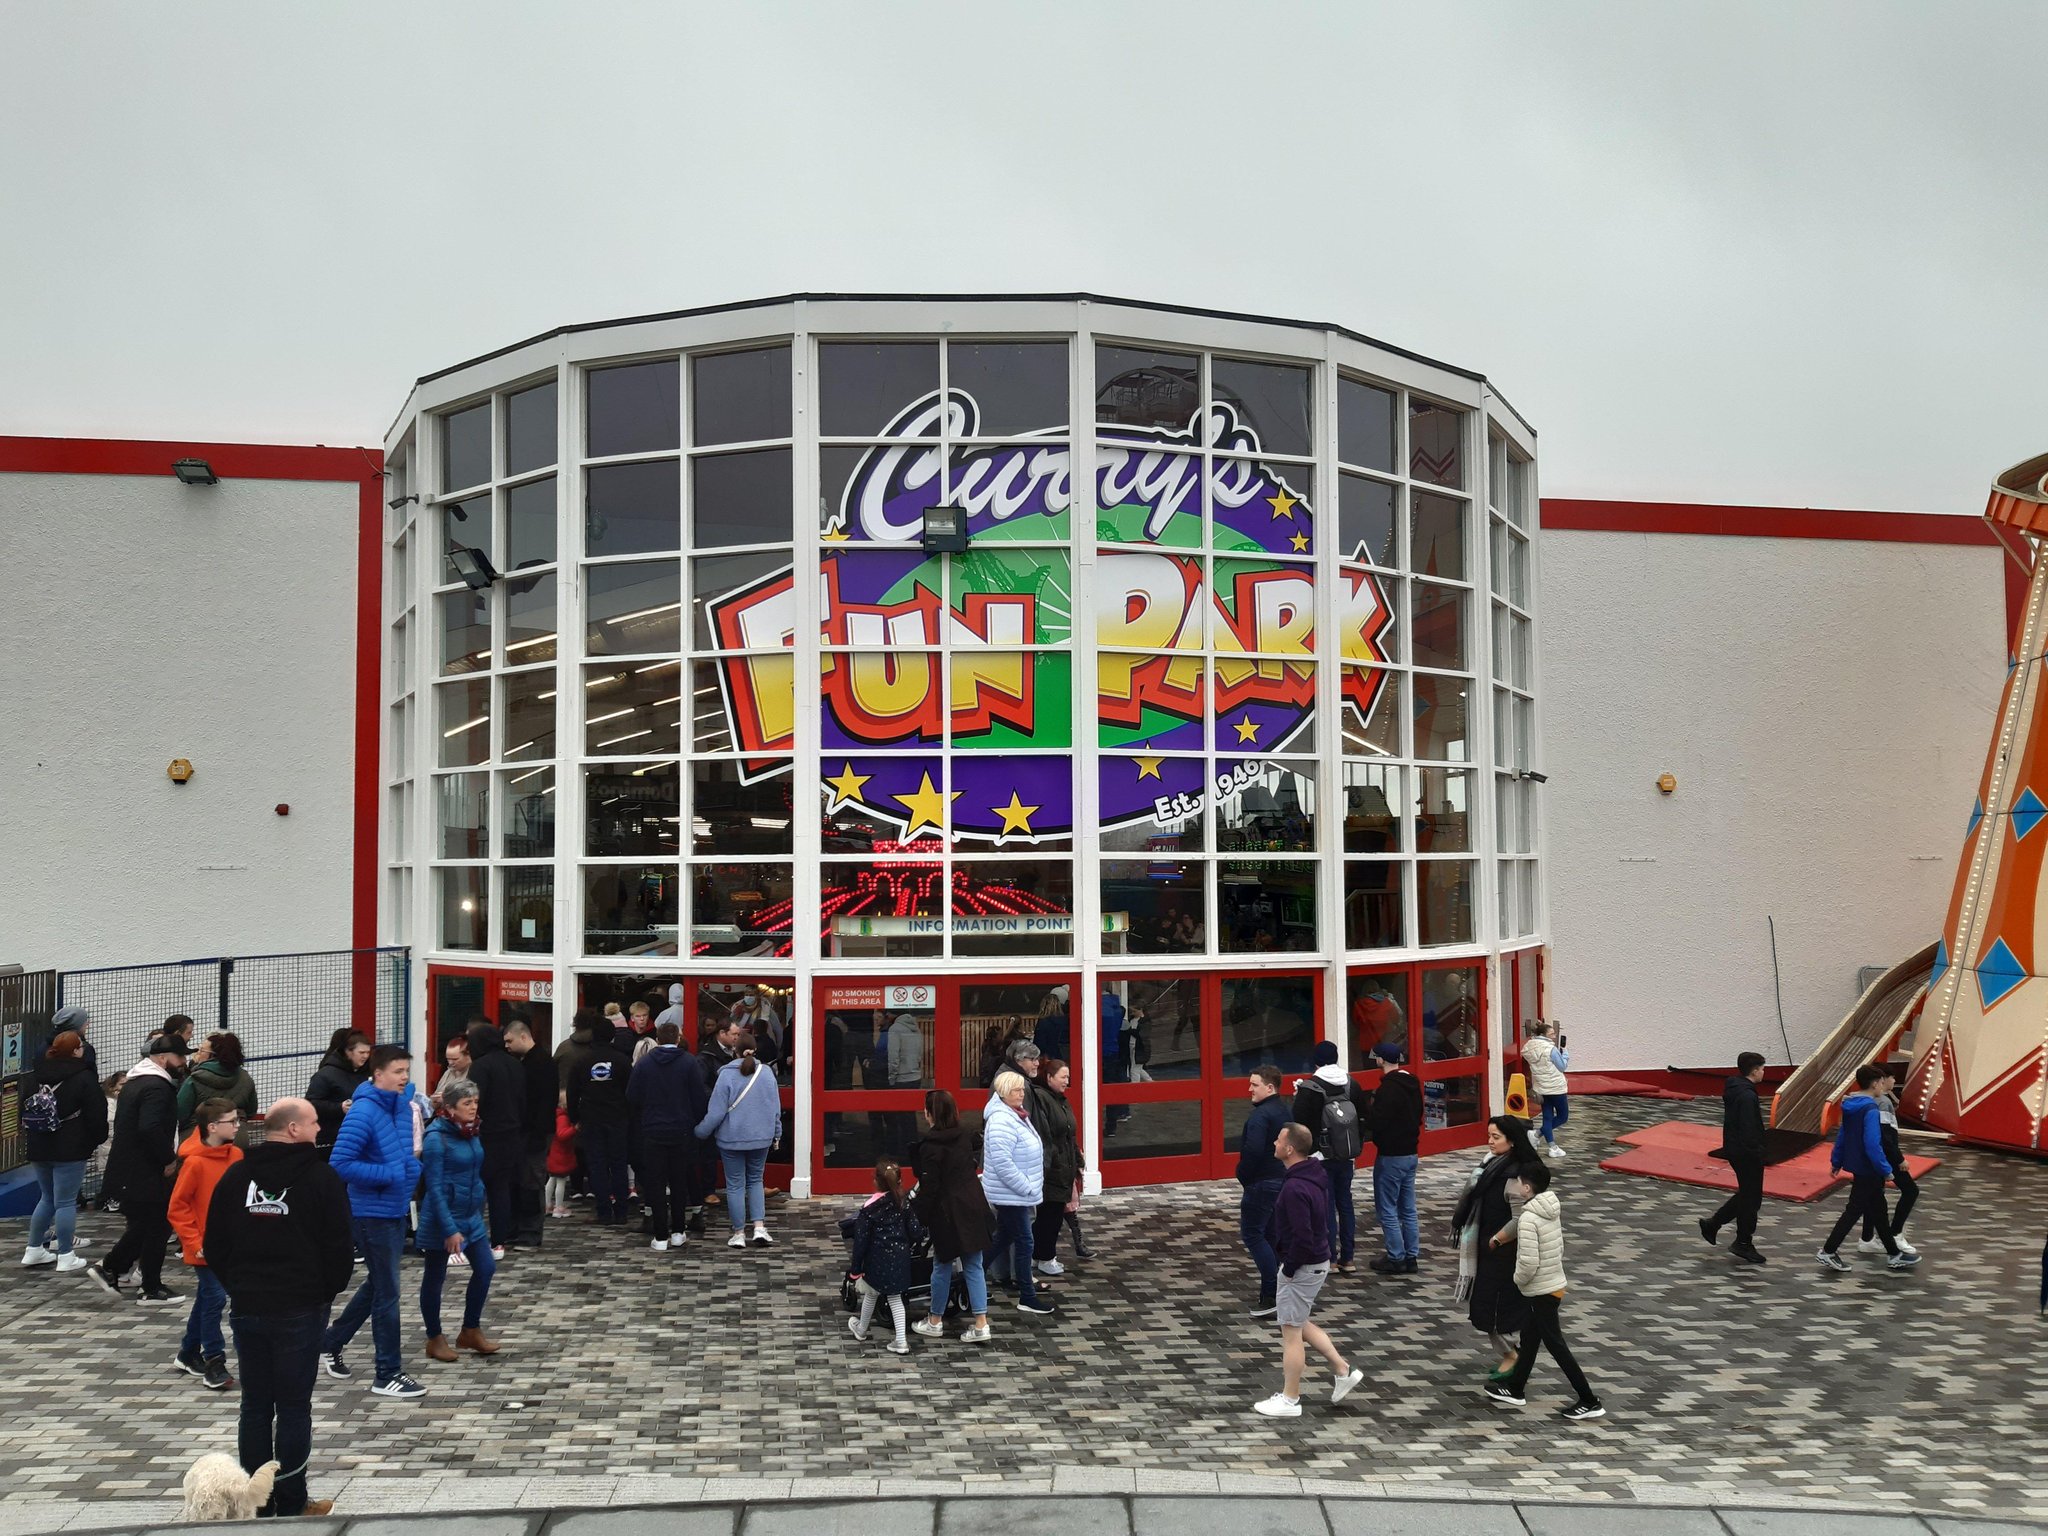 Curry's Fun Park opens its doors with 45 minute warning